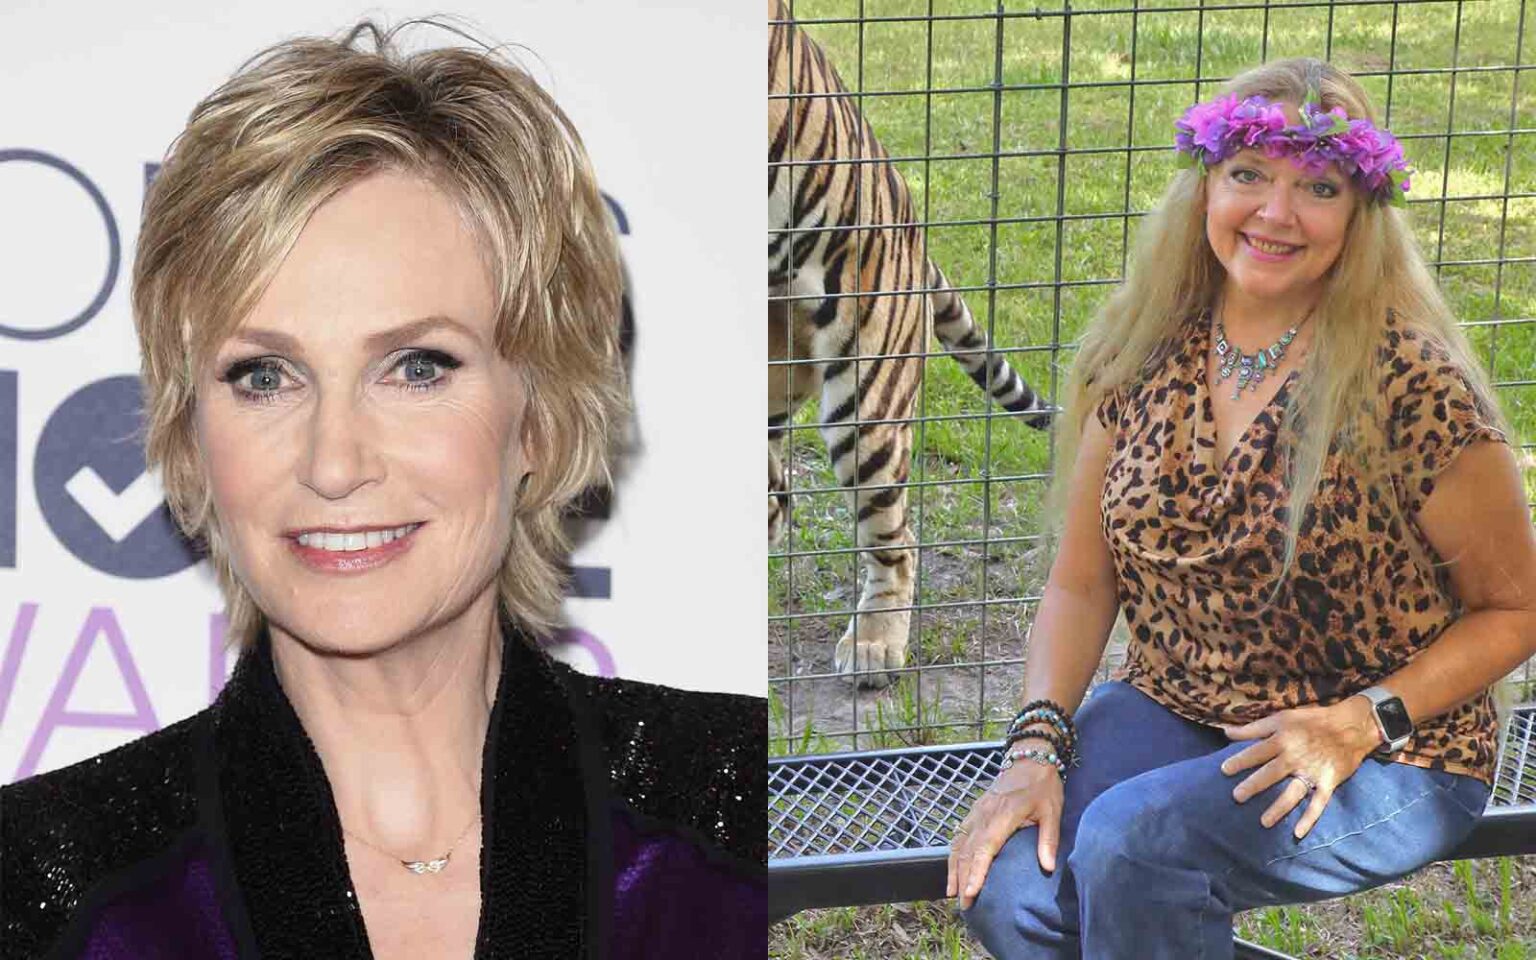 Carole Baskin just revealed that she's bisexual – and Jane Lynch seems excited about it. Here are memes reacting to the weird thirsting.